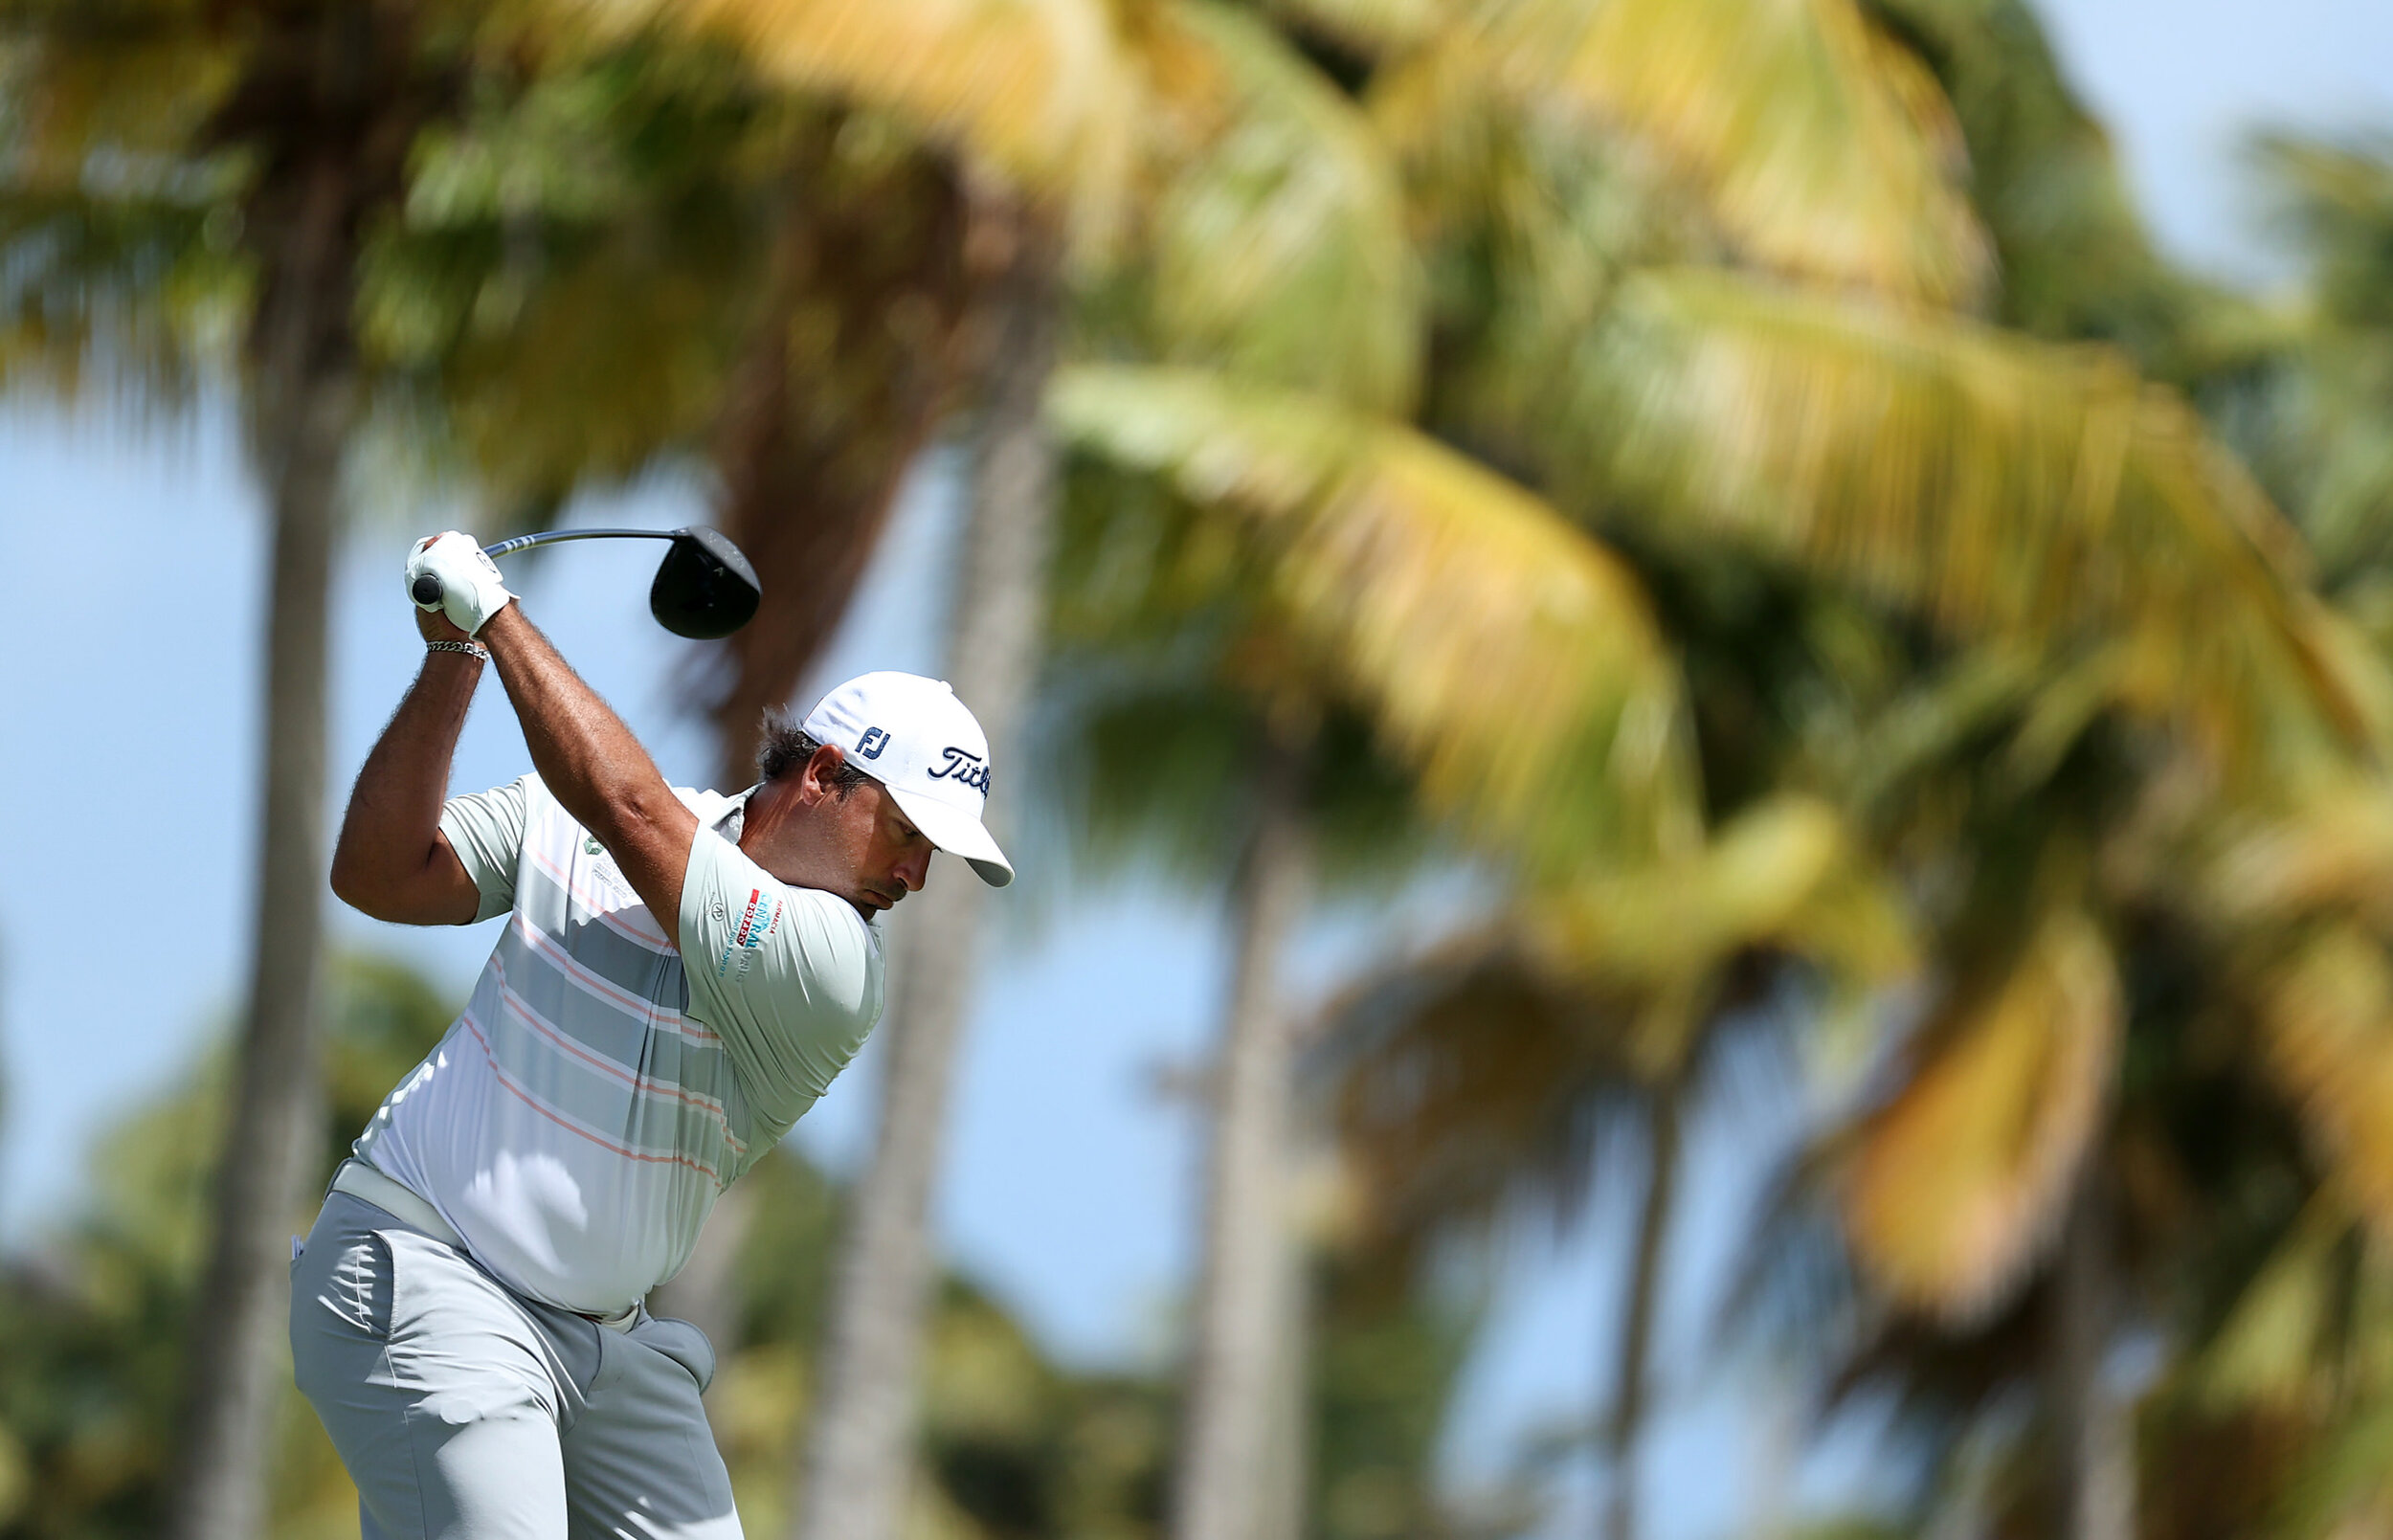  RIO GRANDE, PUERTO RICO - FEBRUARY 25: Rafael Campos of Puerto Rico plays his shot from the 14th tee during the first round of the Puerto Rico Open at Grand Reserve Country Club on February 25, 2021 in Rio Grande, Puerto Rico.  (Photo by Andy Lyons/